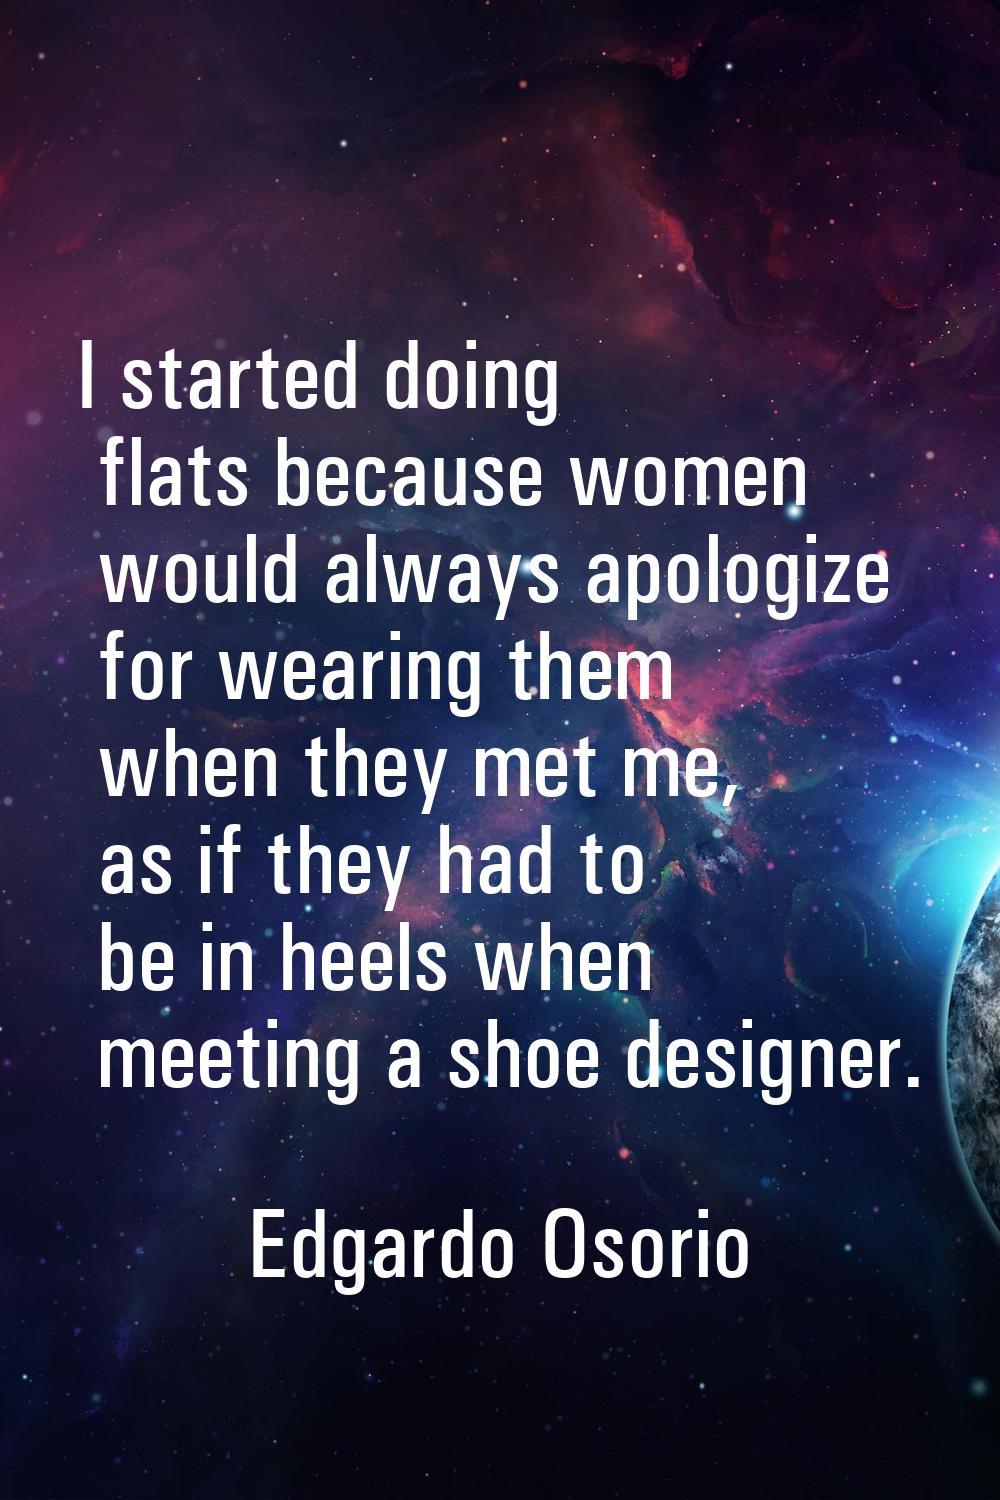 I started doing flats because women would always apologize for wearing them when they met me, as if